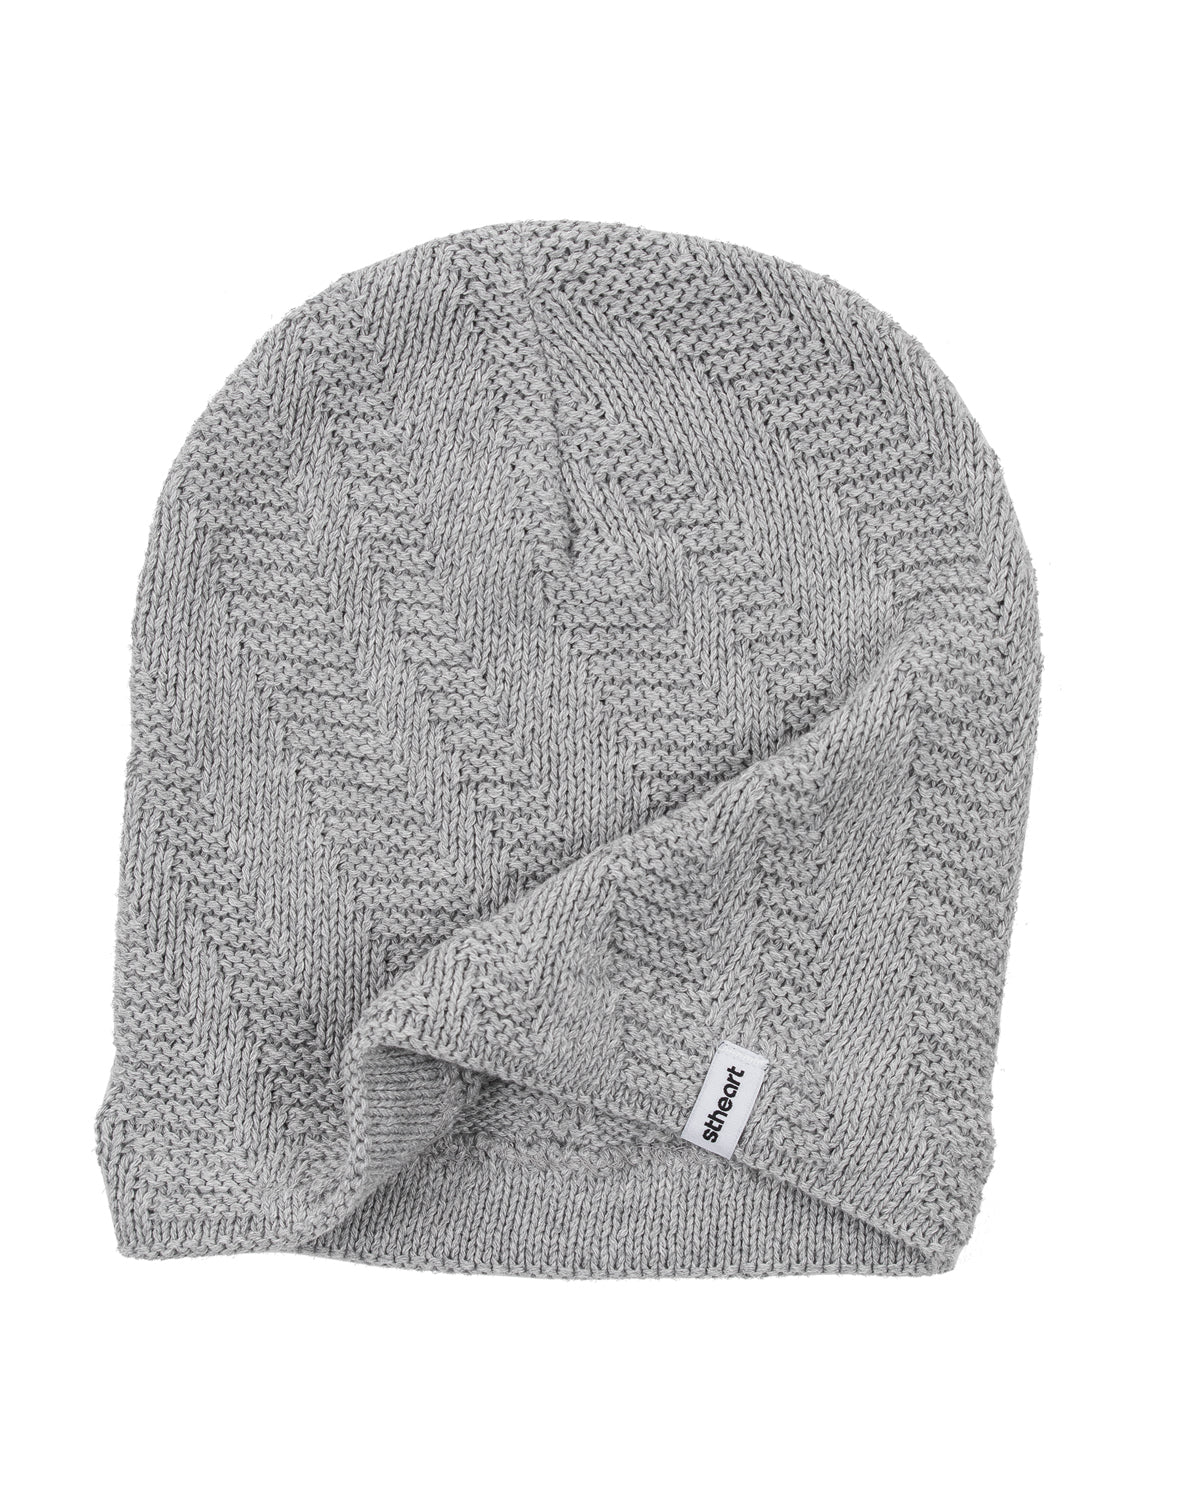 Staircase Slouch Beanie | Sport Grey